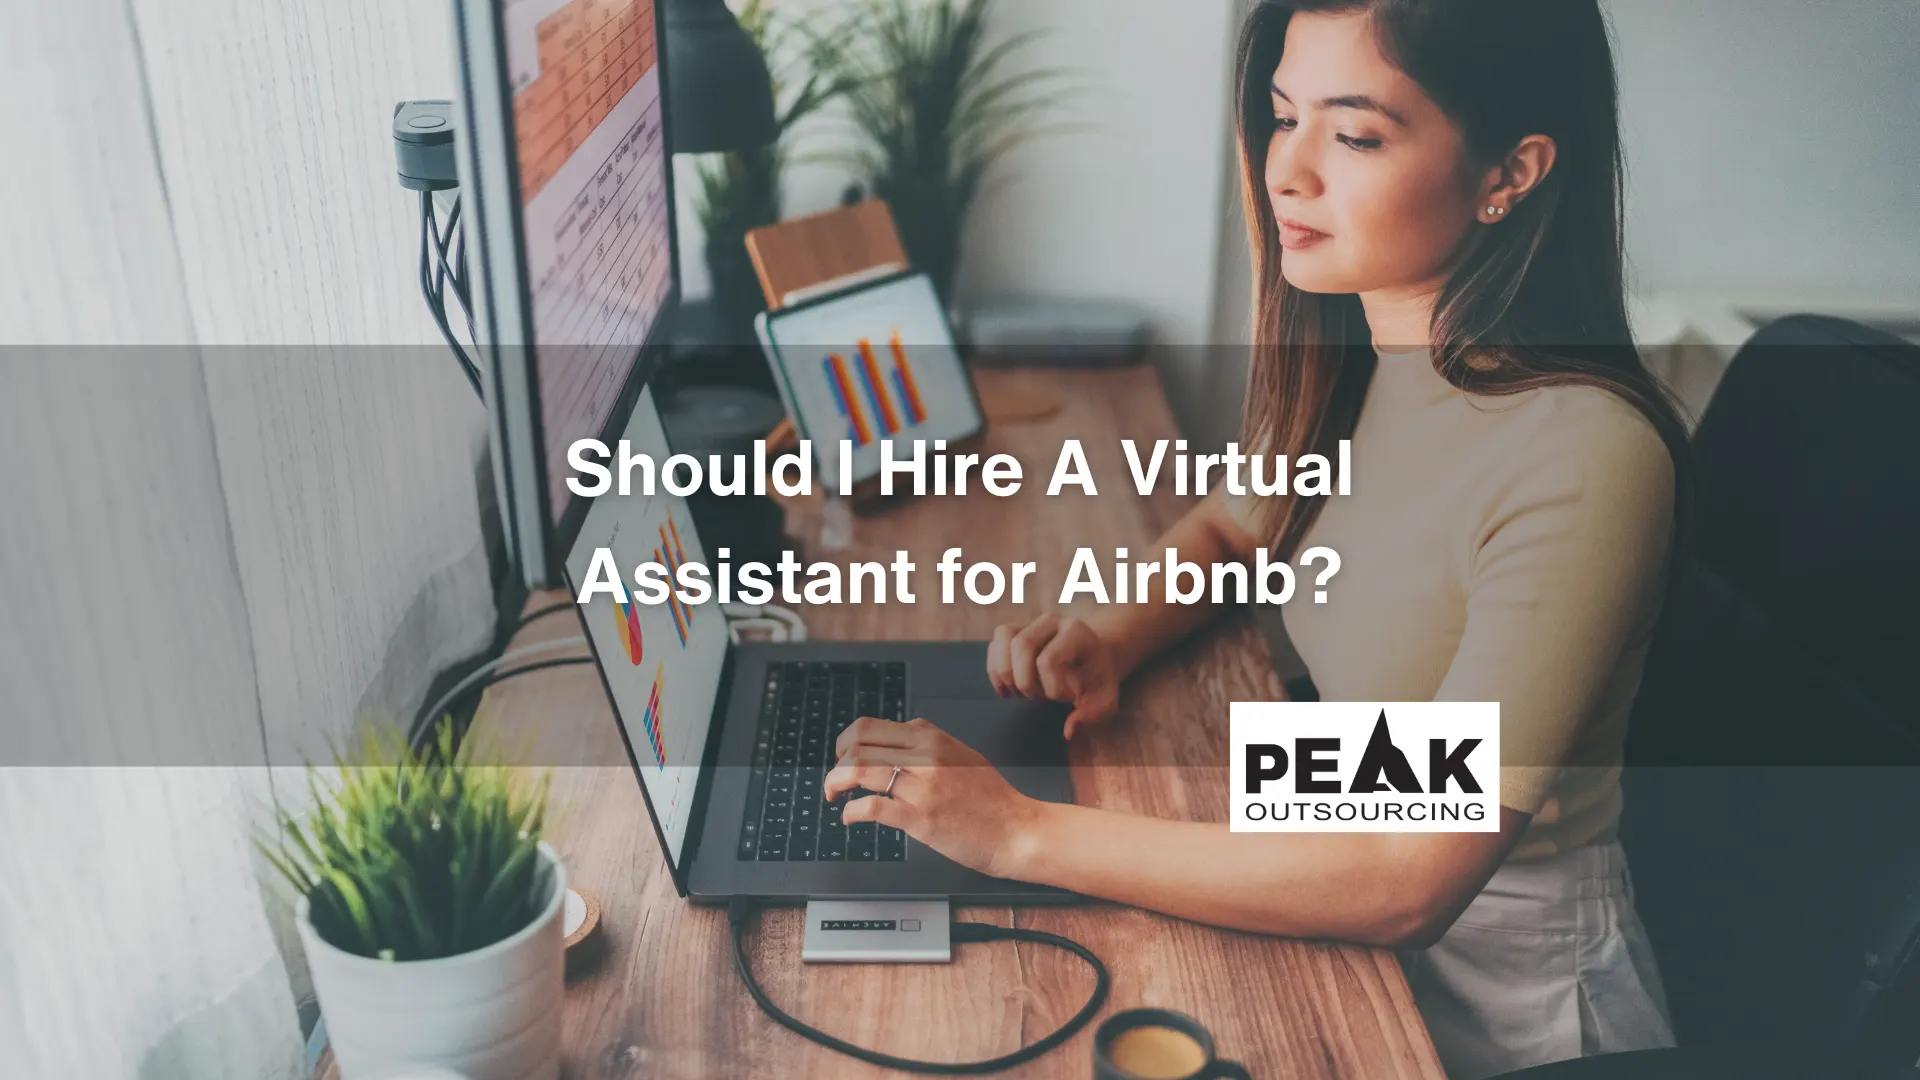 Should I Hire A Virtual Assistant for Airbnb